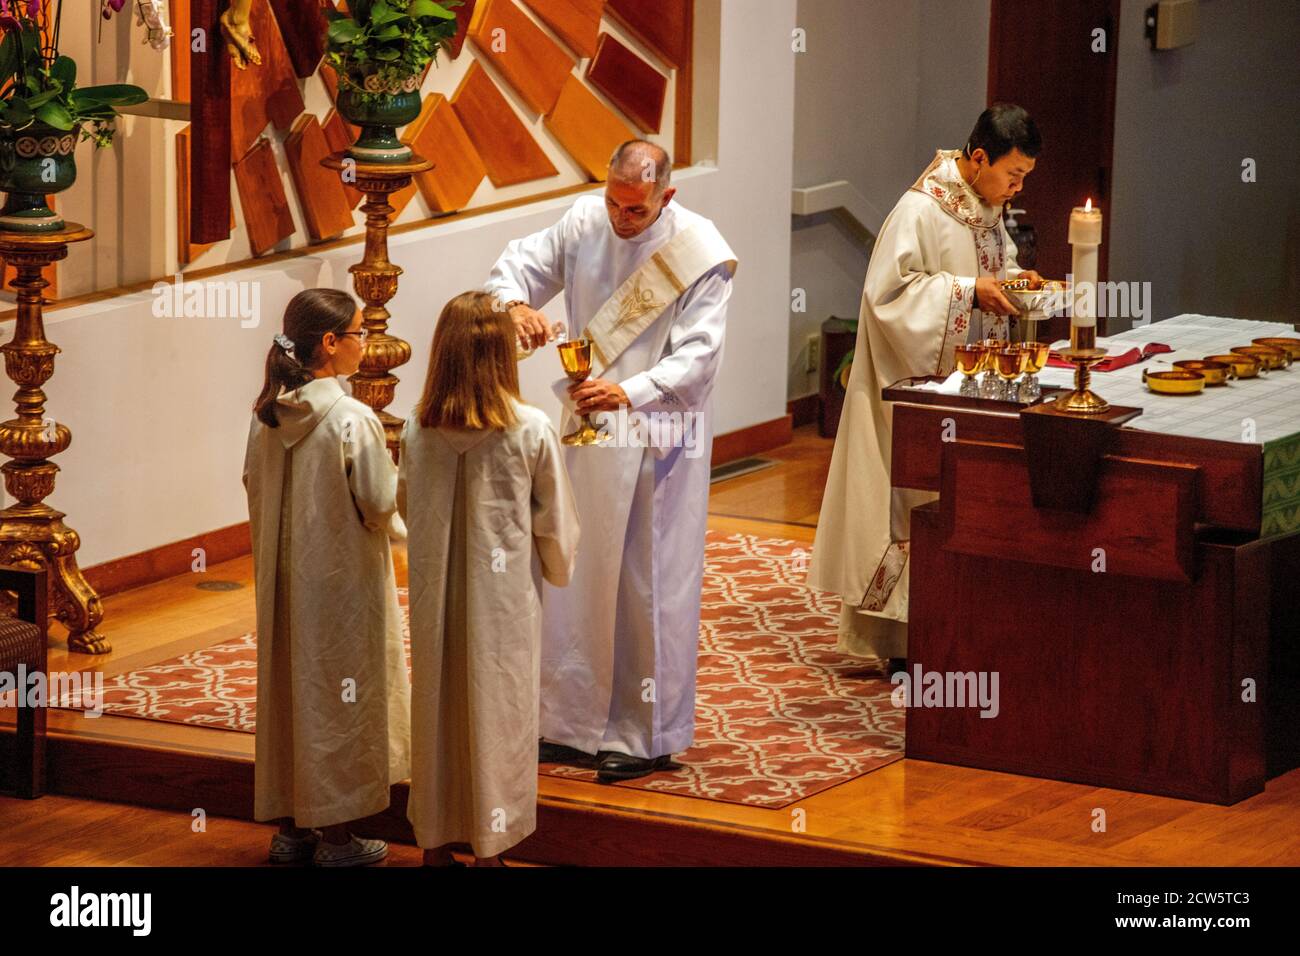 A robed deacon pours a goblet of sacramental wine received from a female assistant while participating in mass at the altar of a Southern California C Stock Photo